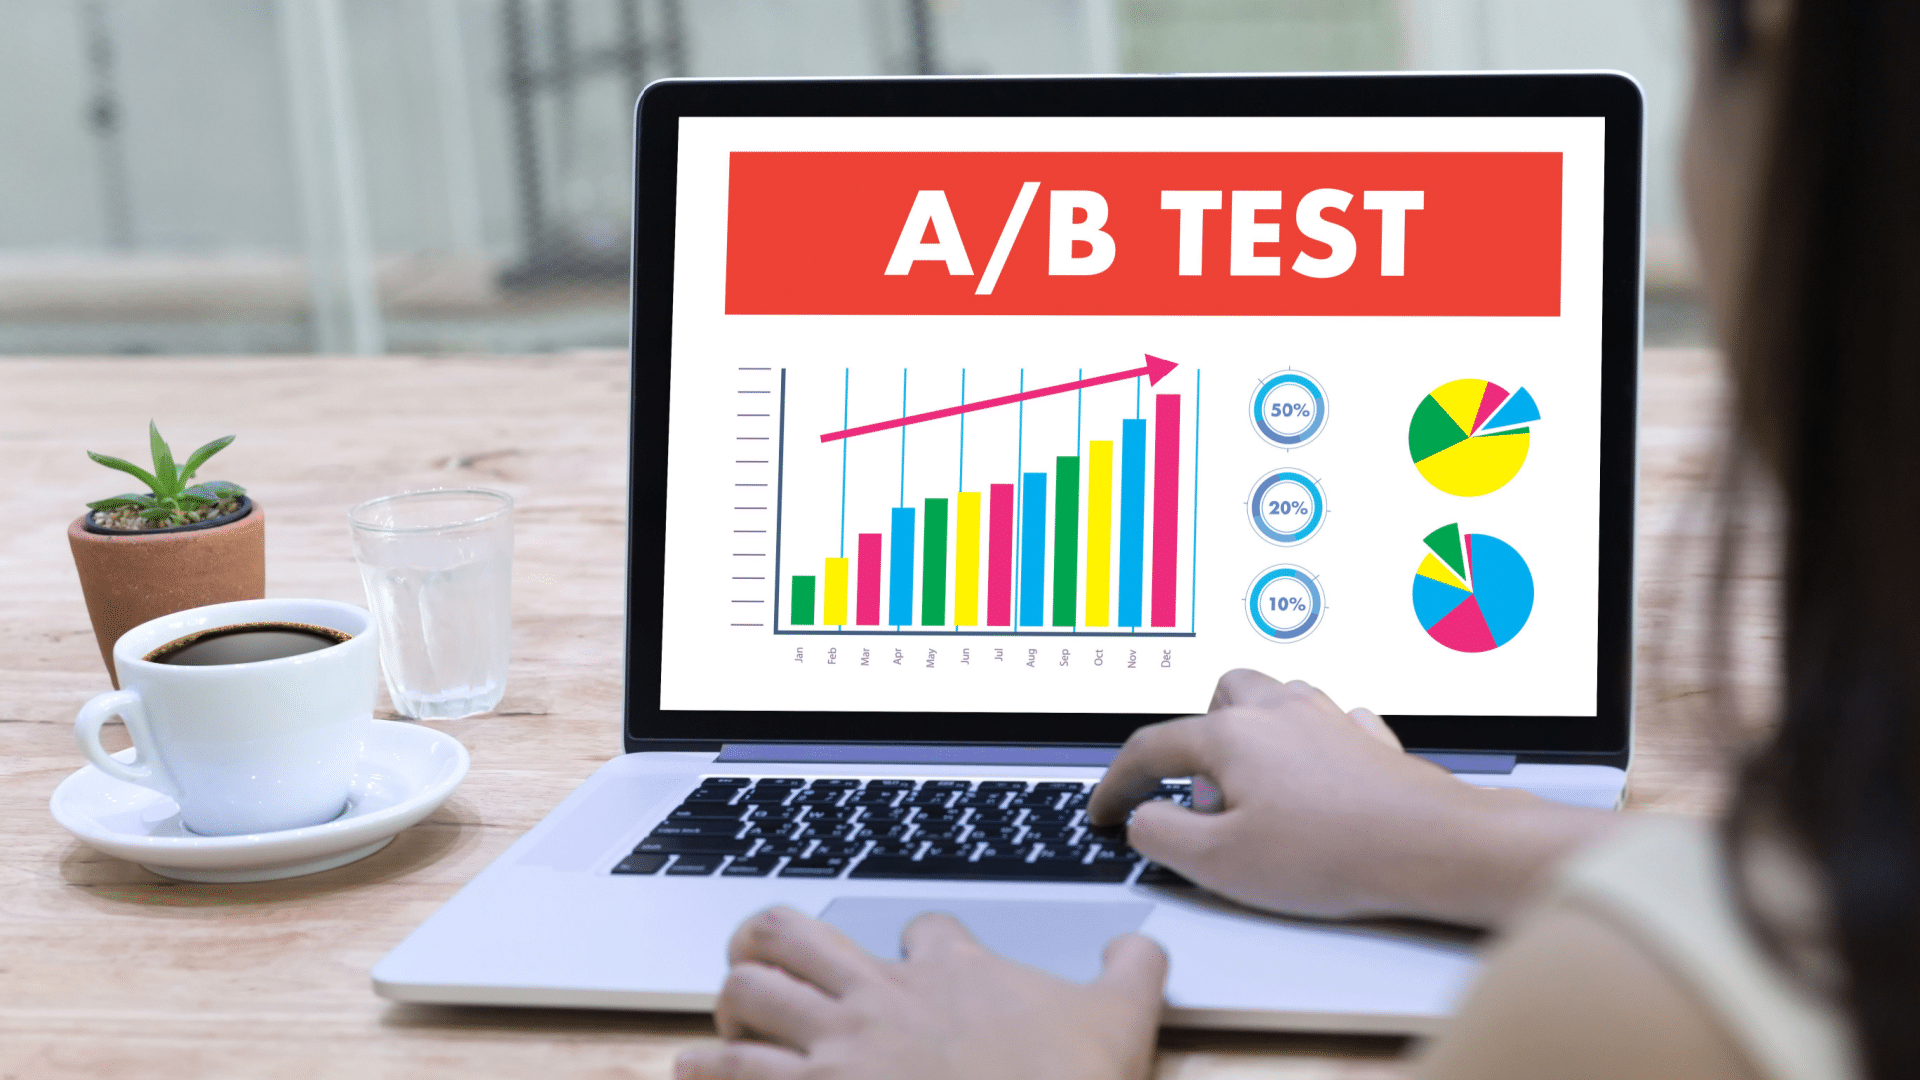 #A/B testing and SEO: How to navigate pitfalls and maximize results